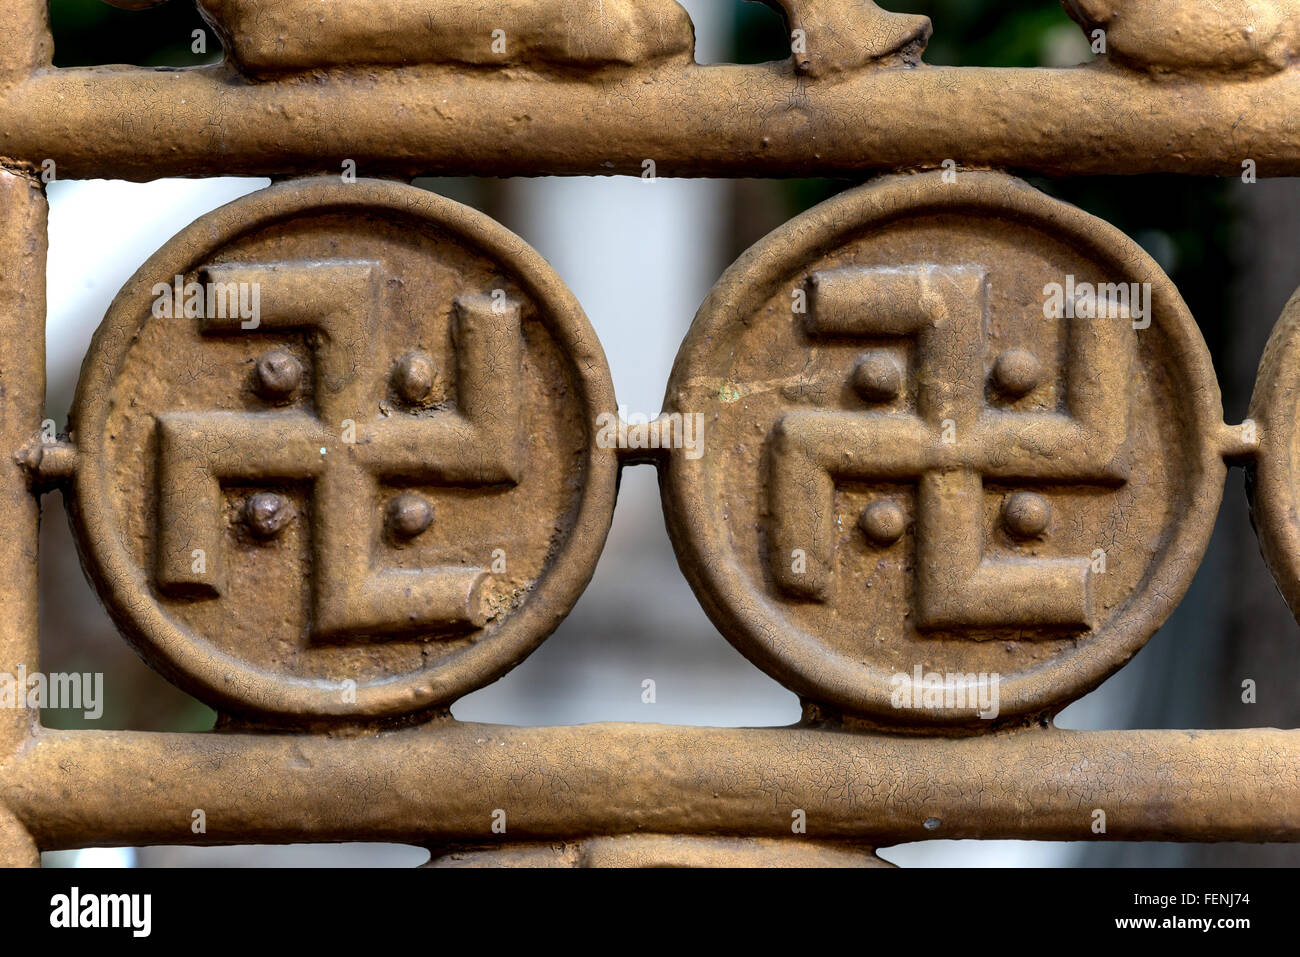 Page 2 - Hindu Swastika High Resolution Stock Photography and Images - Alamy